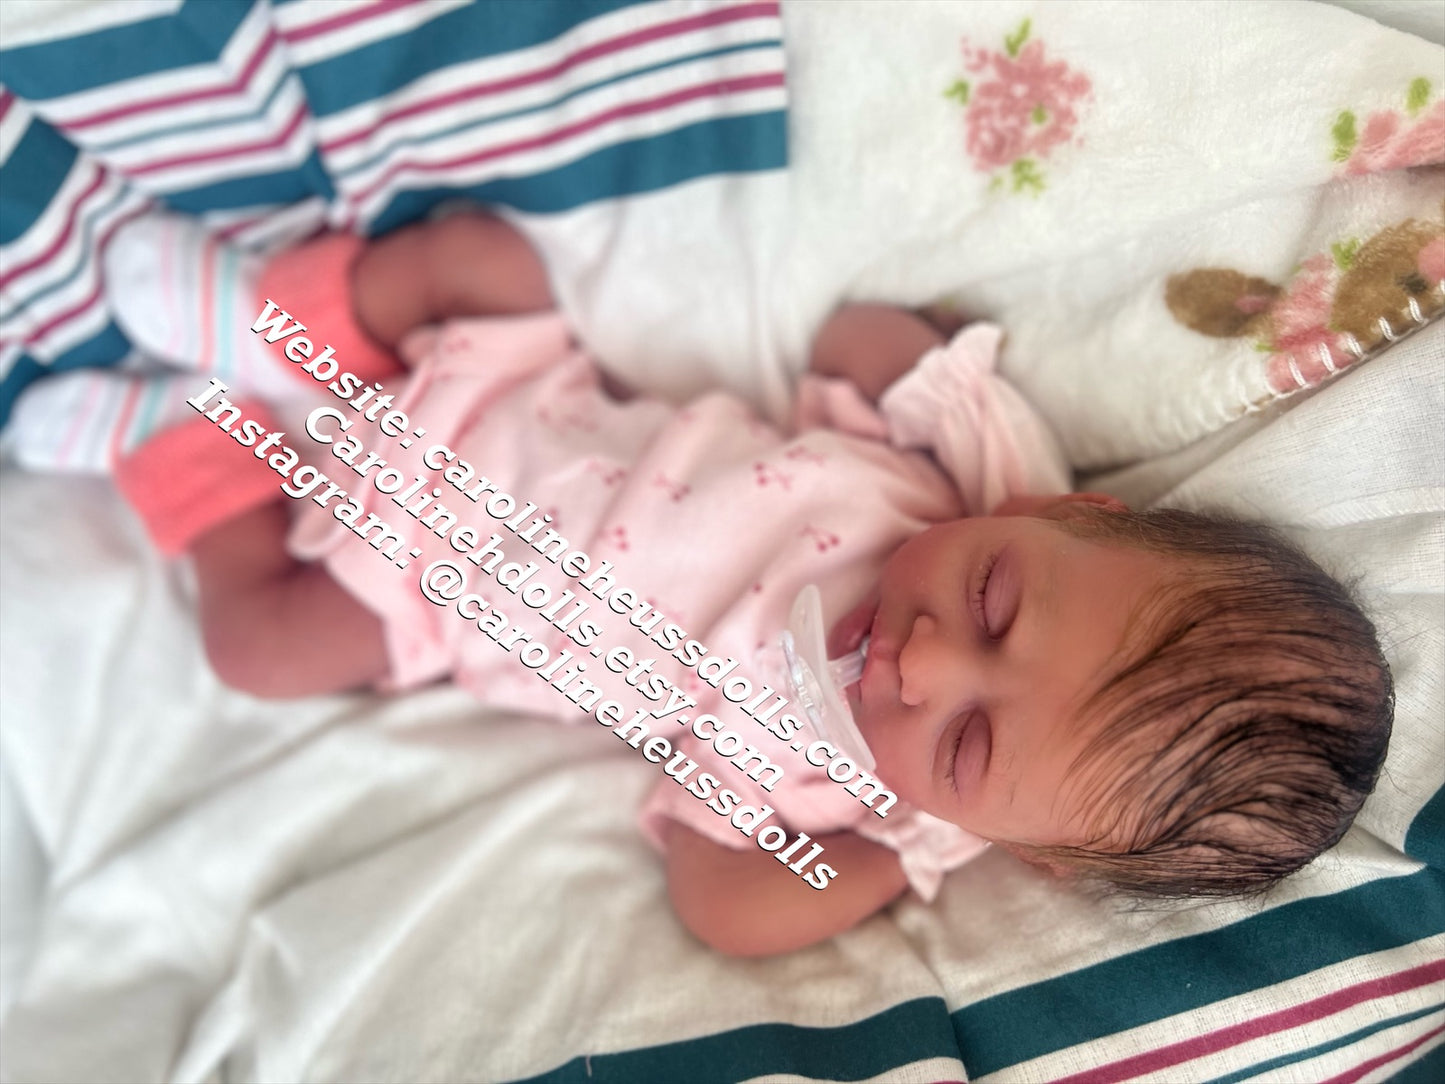 Custom order, High quality full body silicone baby doll, Beautiful little girl, full body silicone, reborn baby girl doll River, layaway available